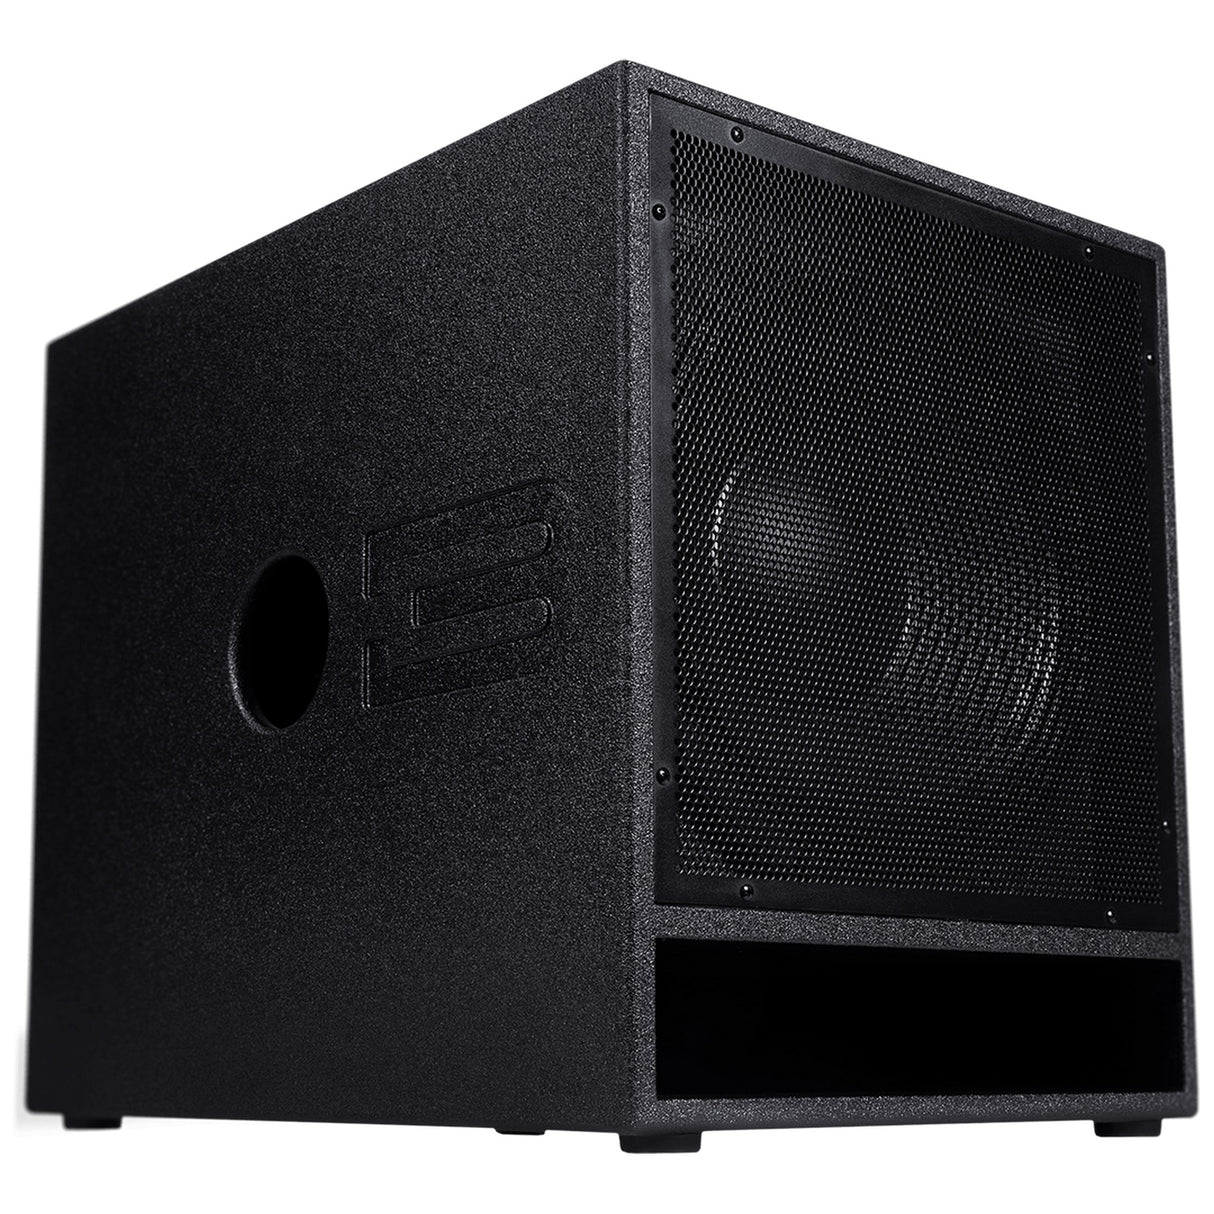 BASSBOSS BB15-MK3 2500W Single 15-Inch Powered Vented Direct-Radiating Subwoofer